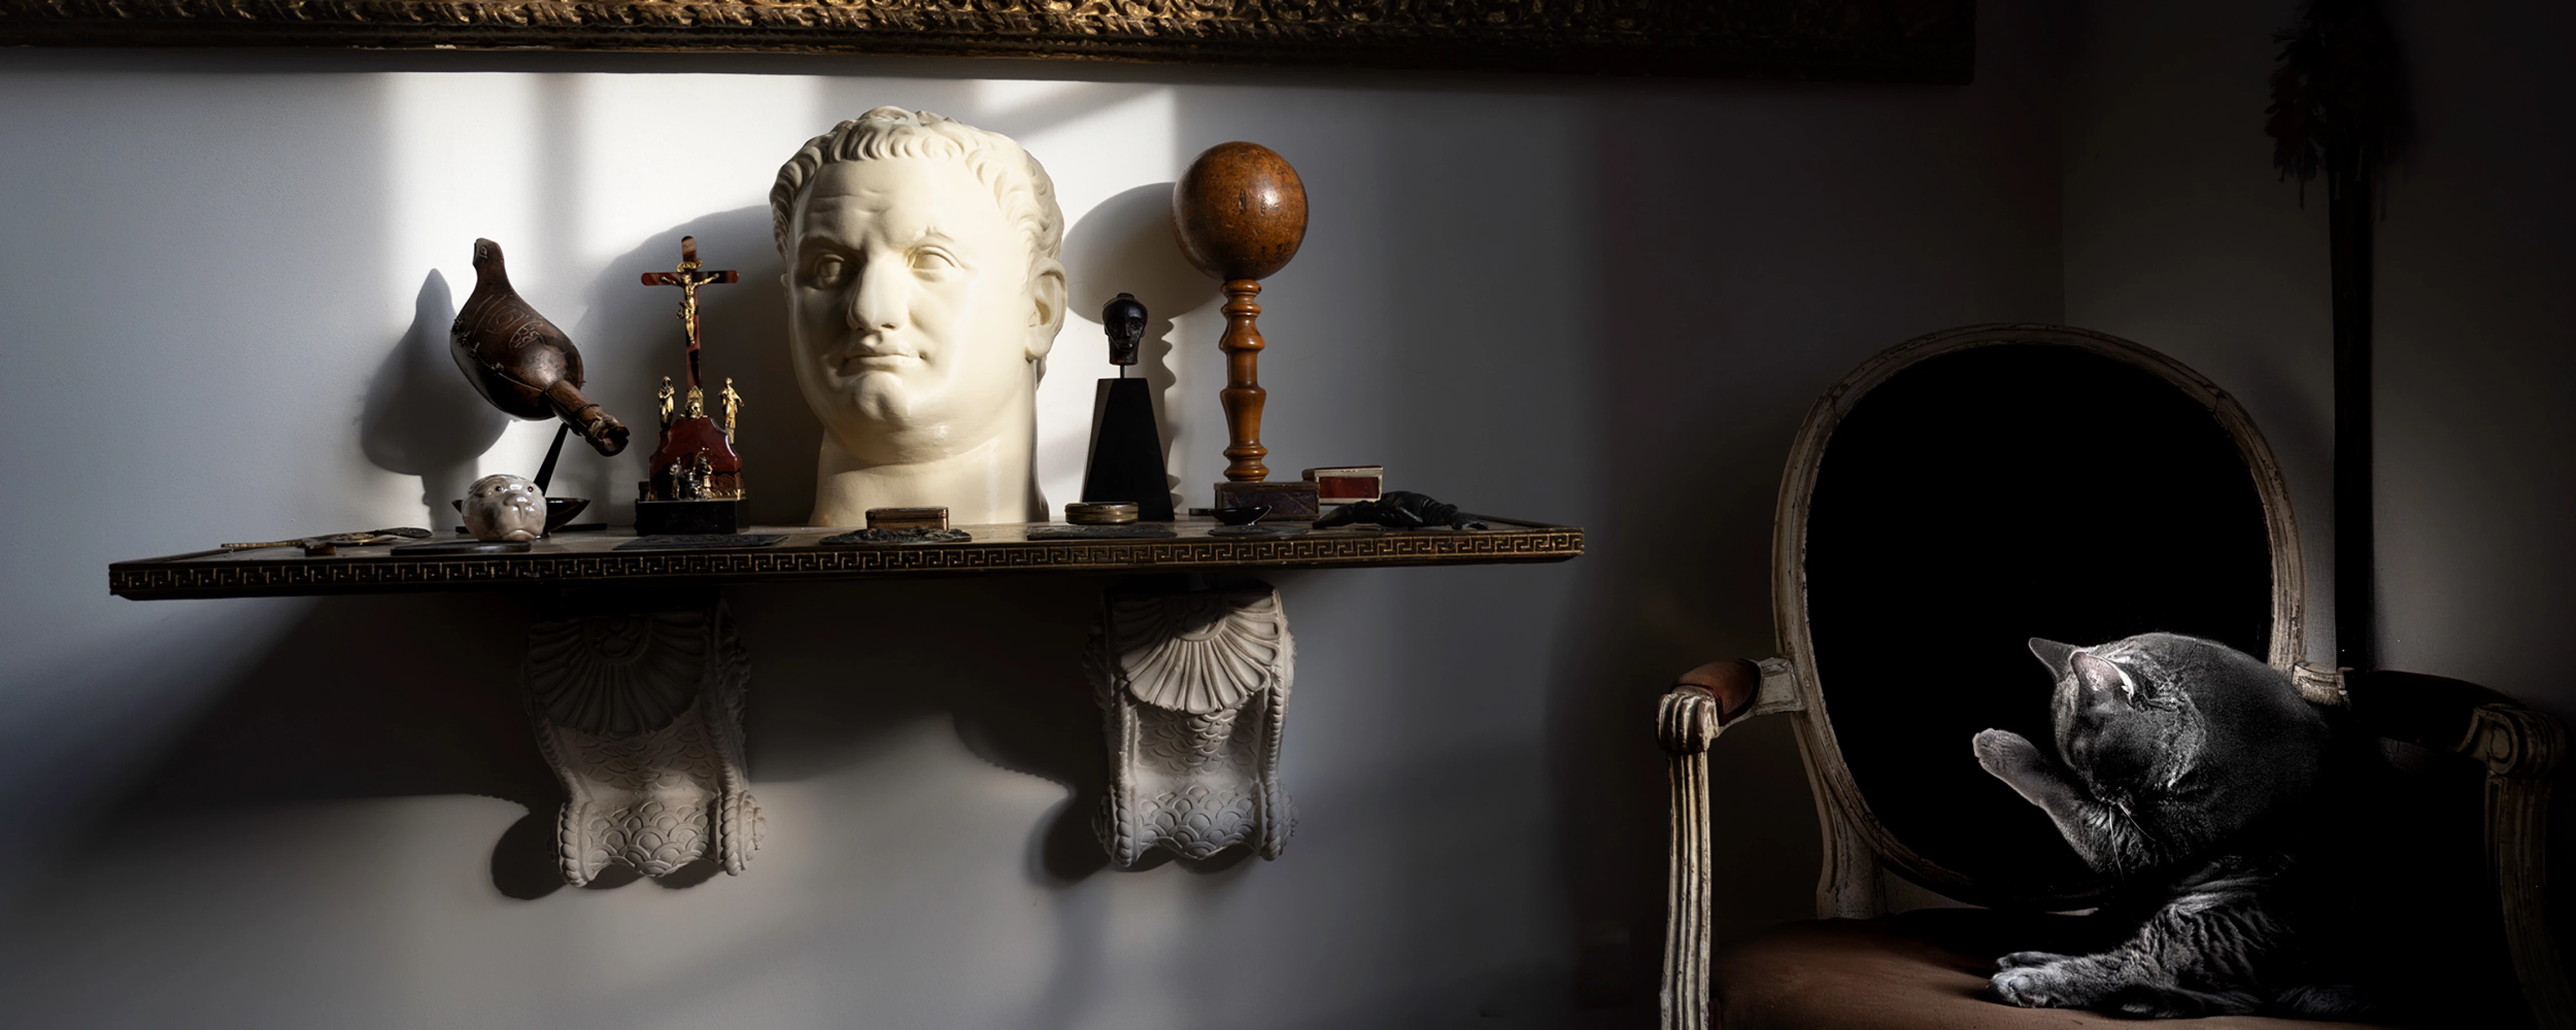 “Emperor Titus” by Unidentified Sculptors  from the Imperial Portraits of Pantelleria collection